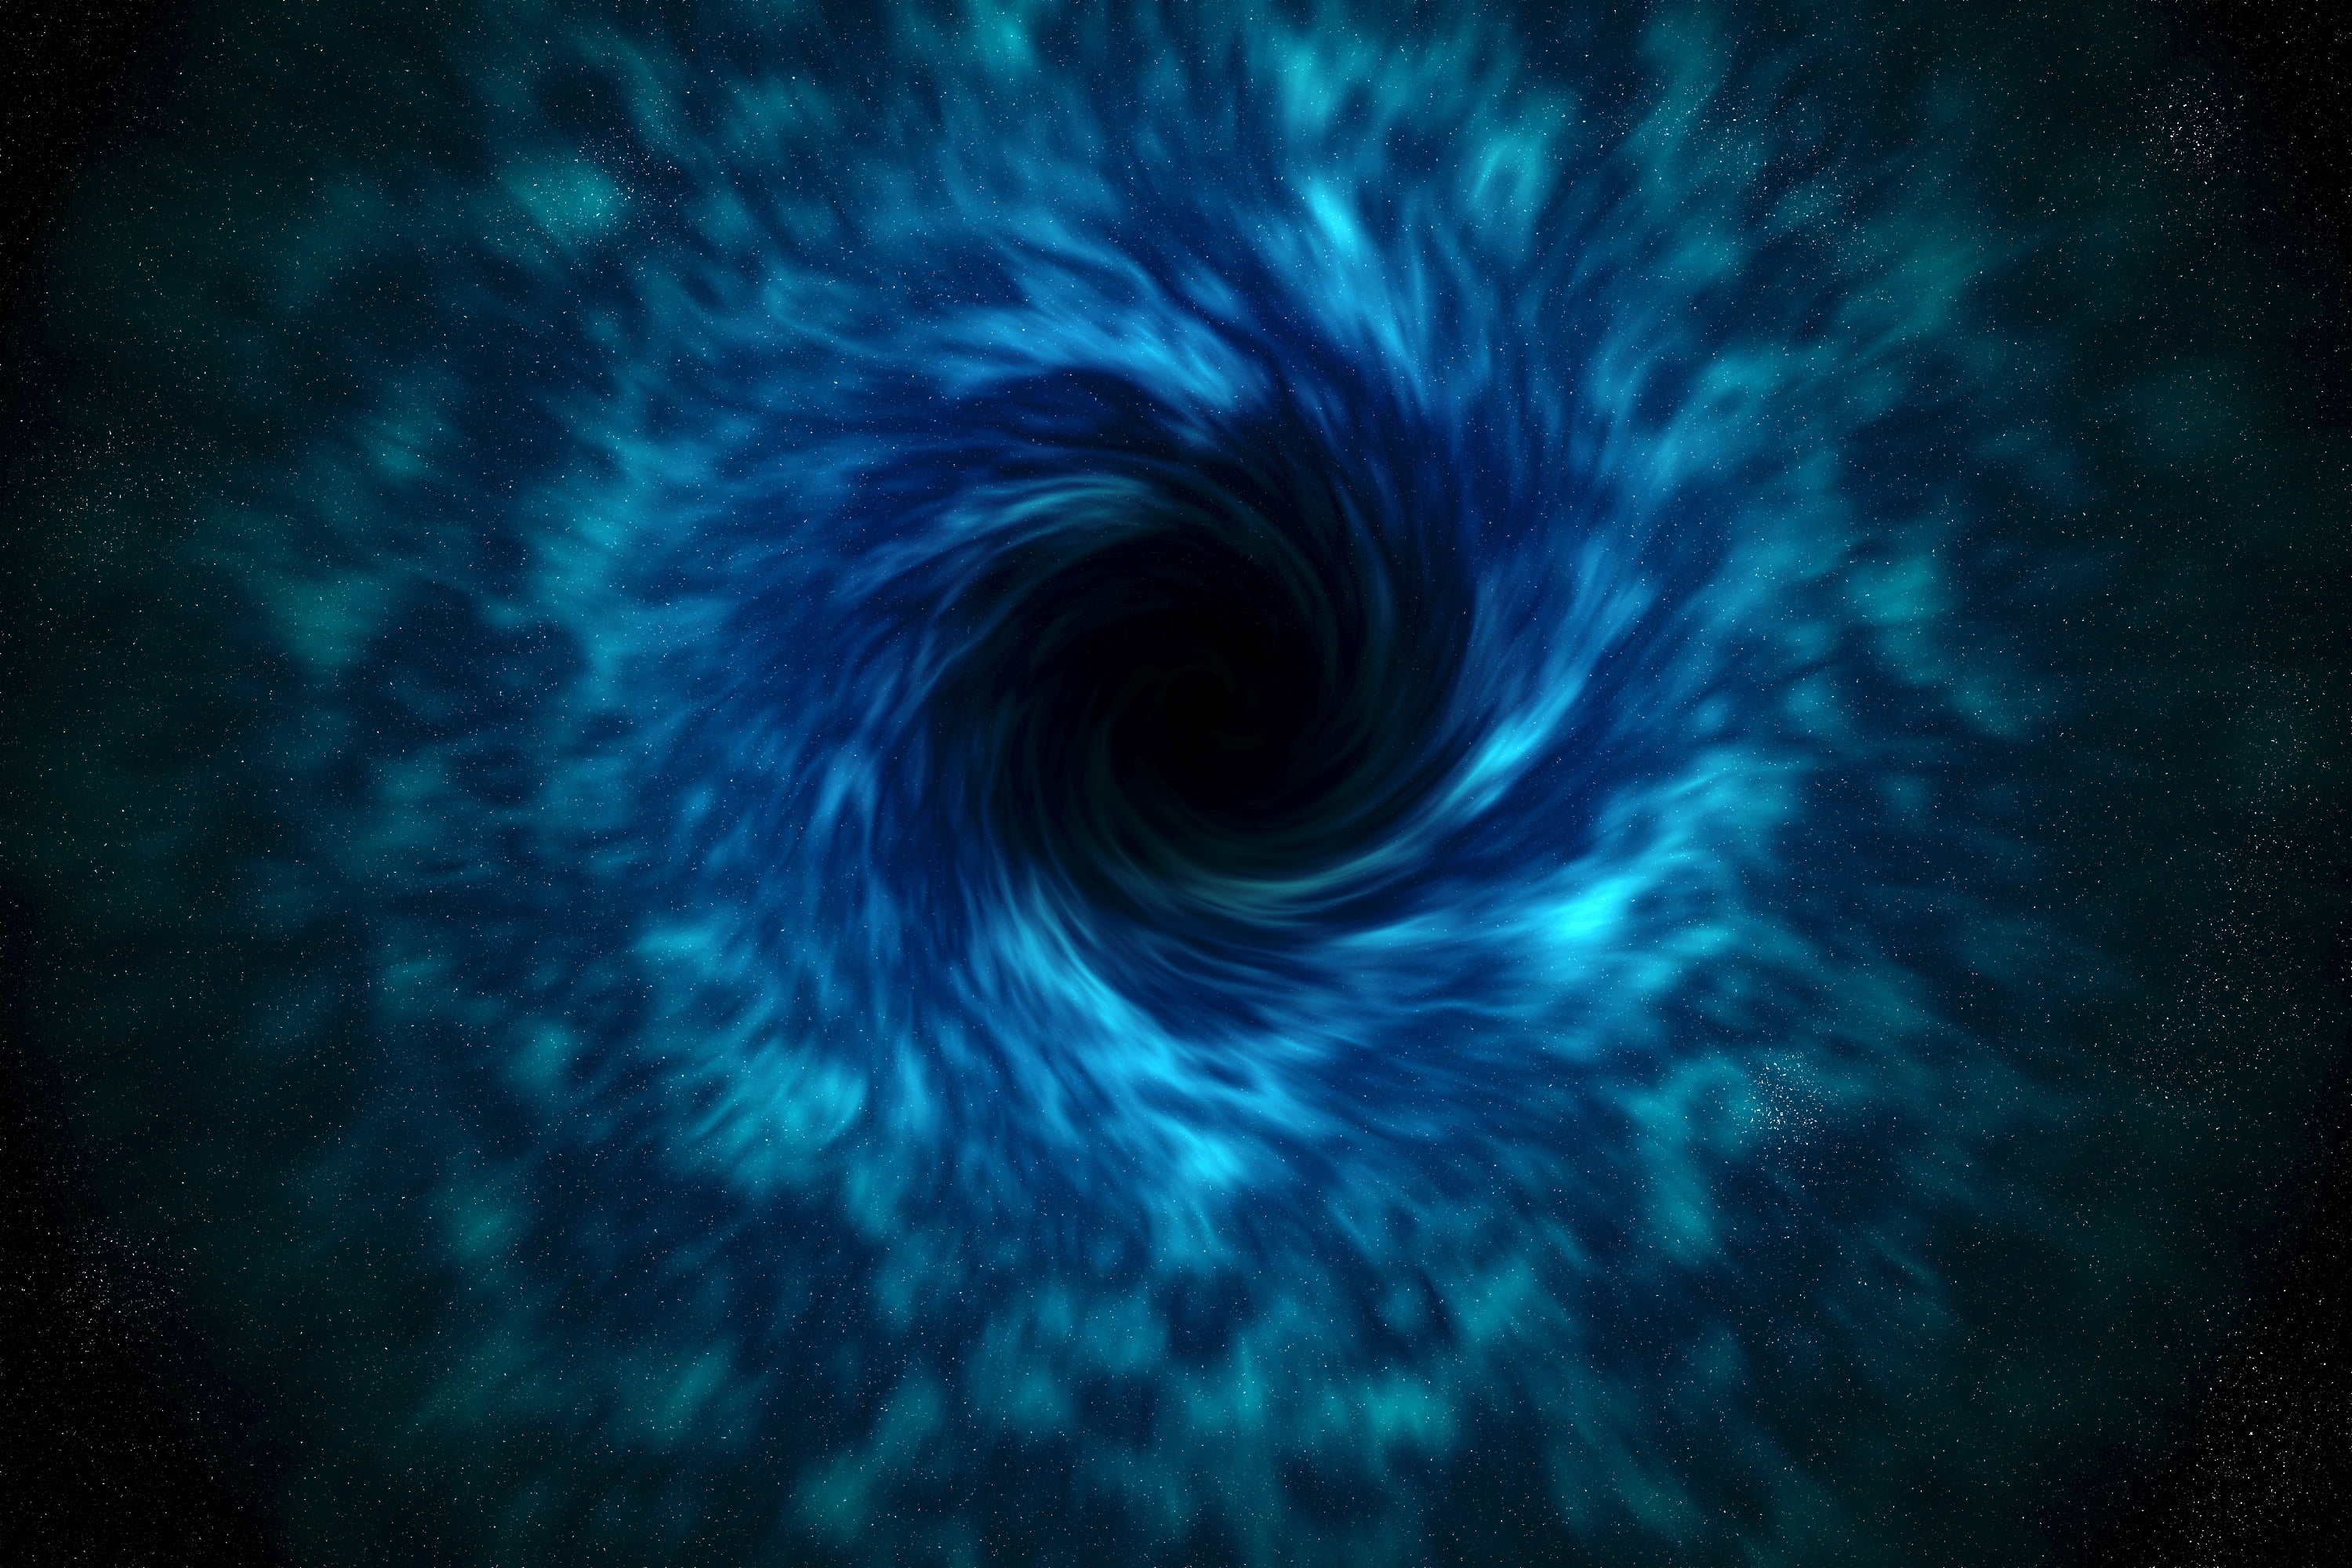 blue whirl illustration, stars, time, space, distortion, the bleck hole